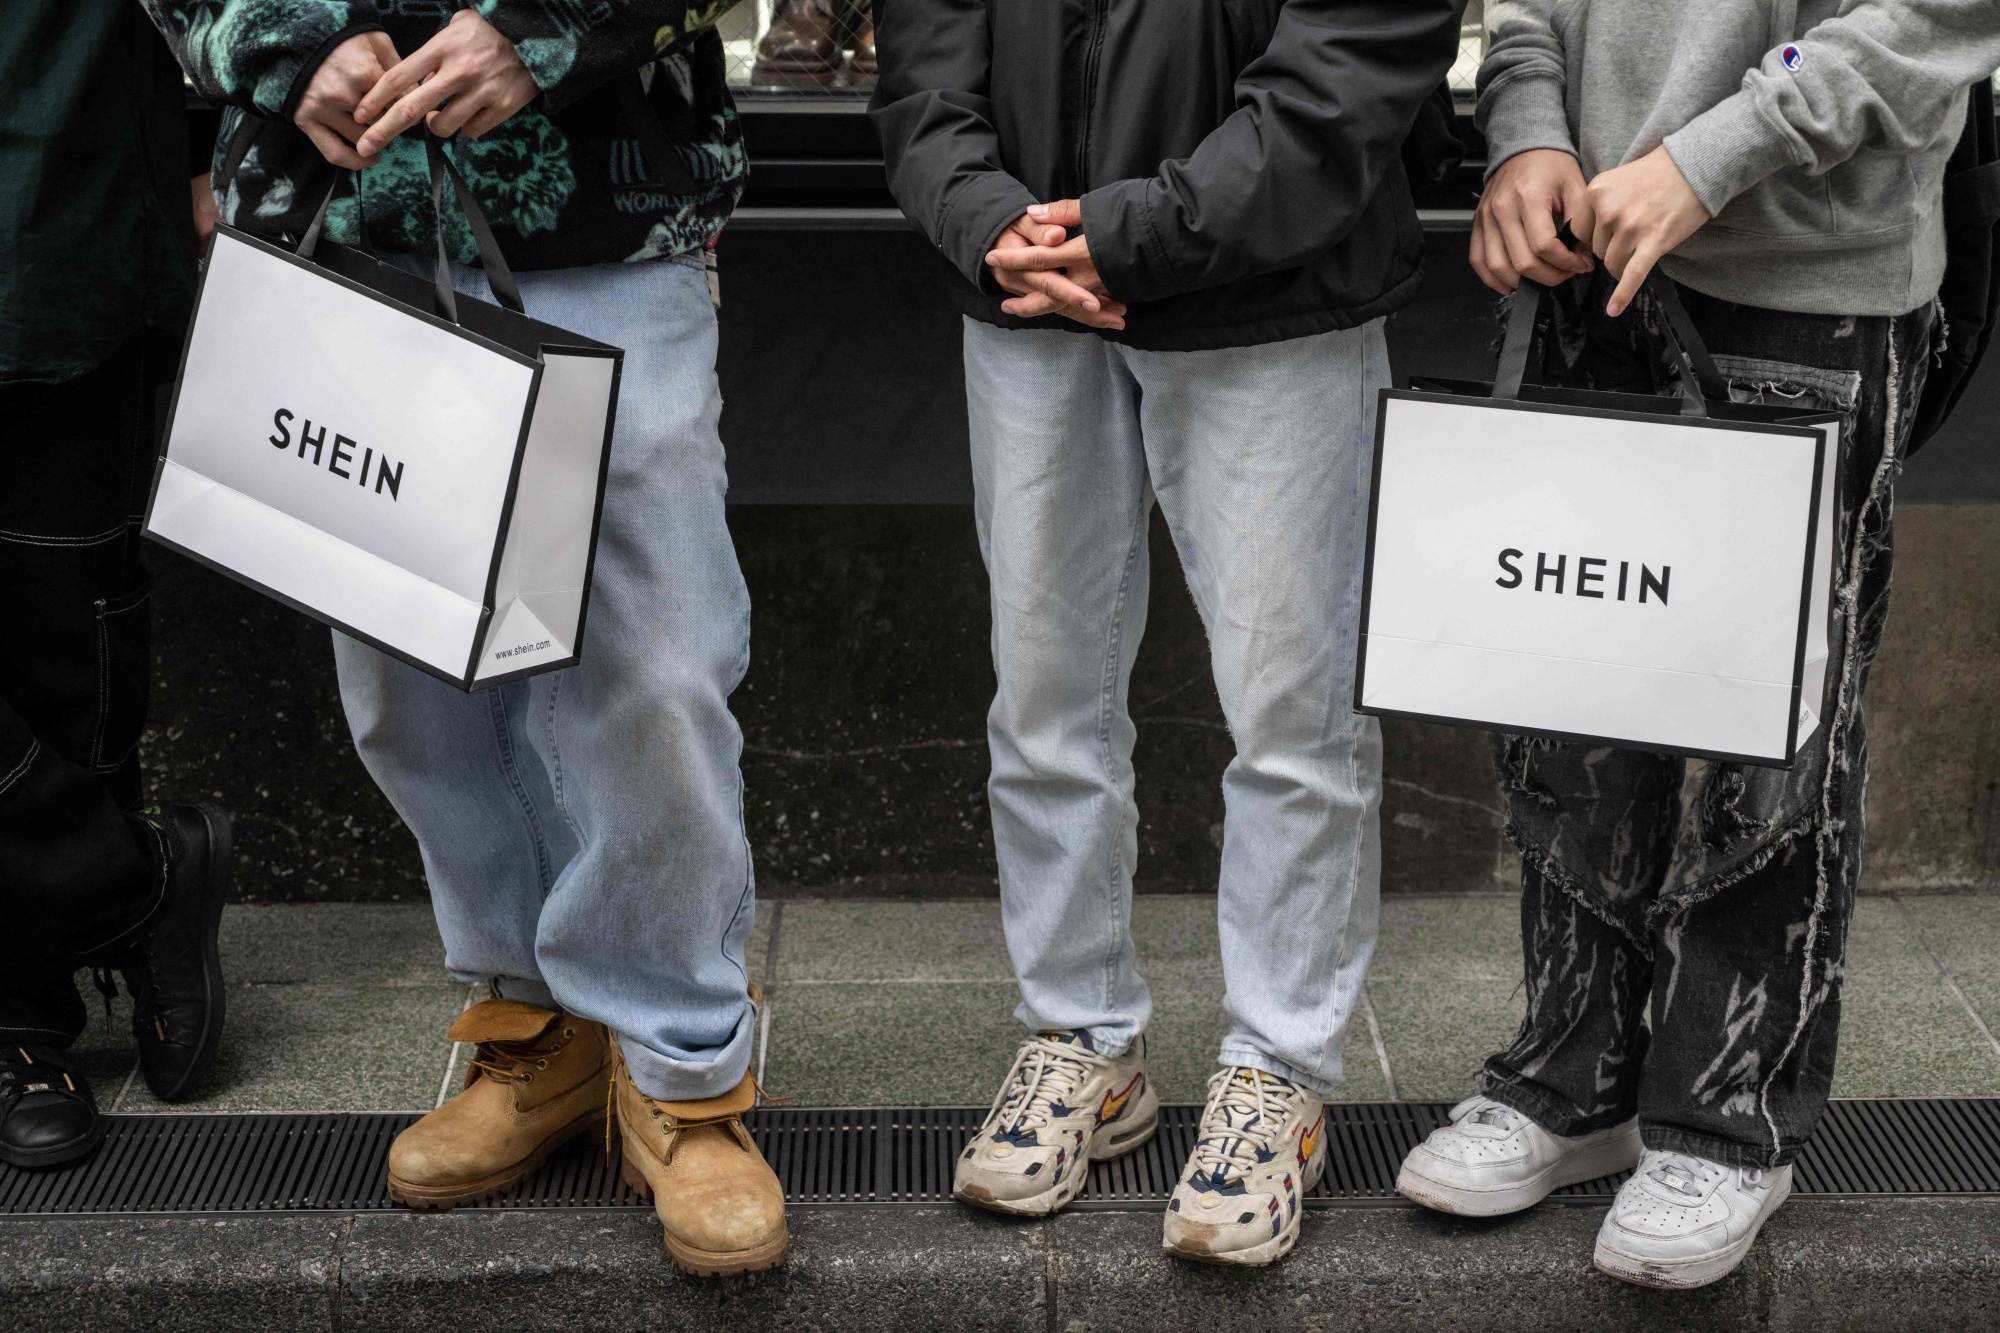 Shein Strikes Deal With Forever 21 - WSJ